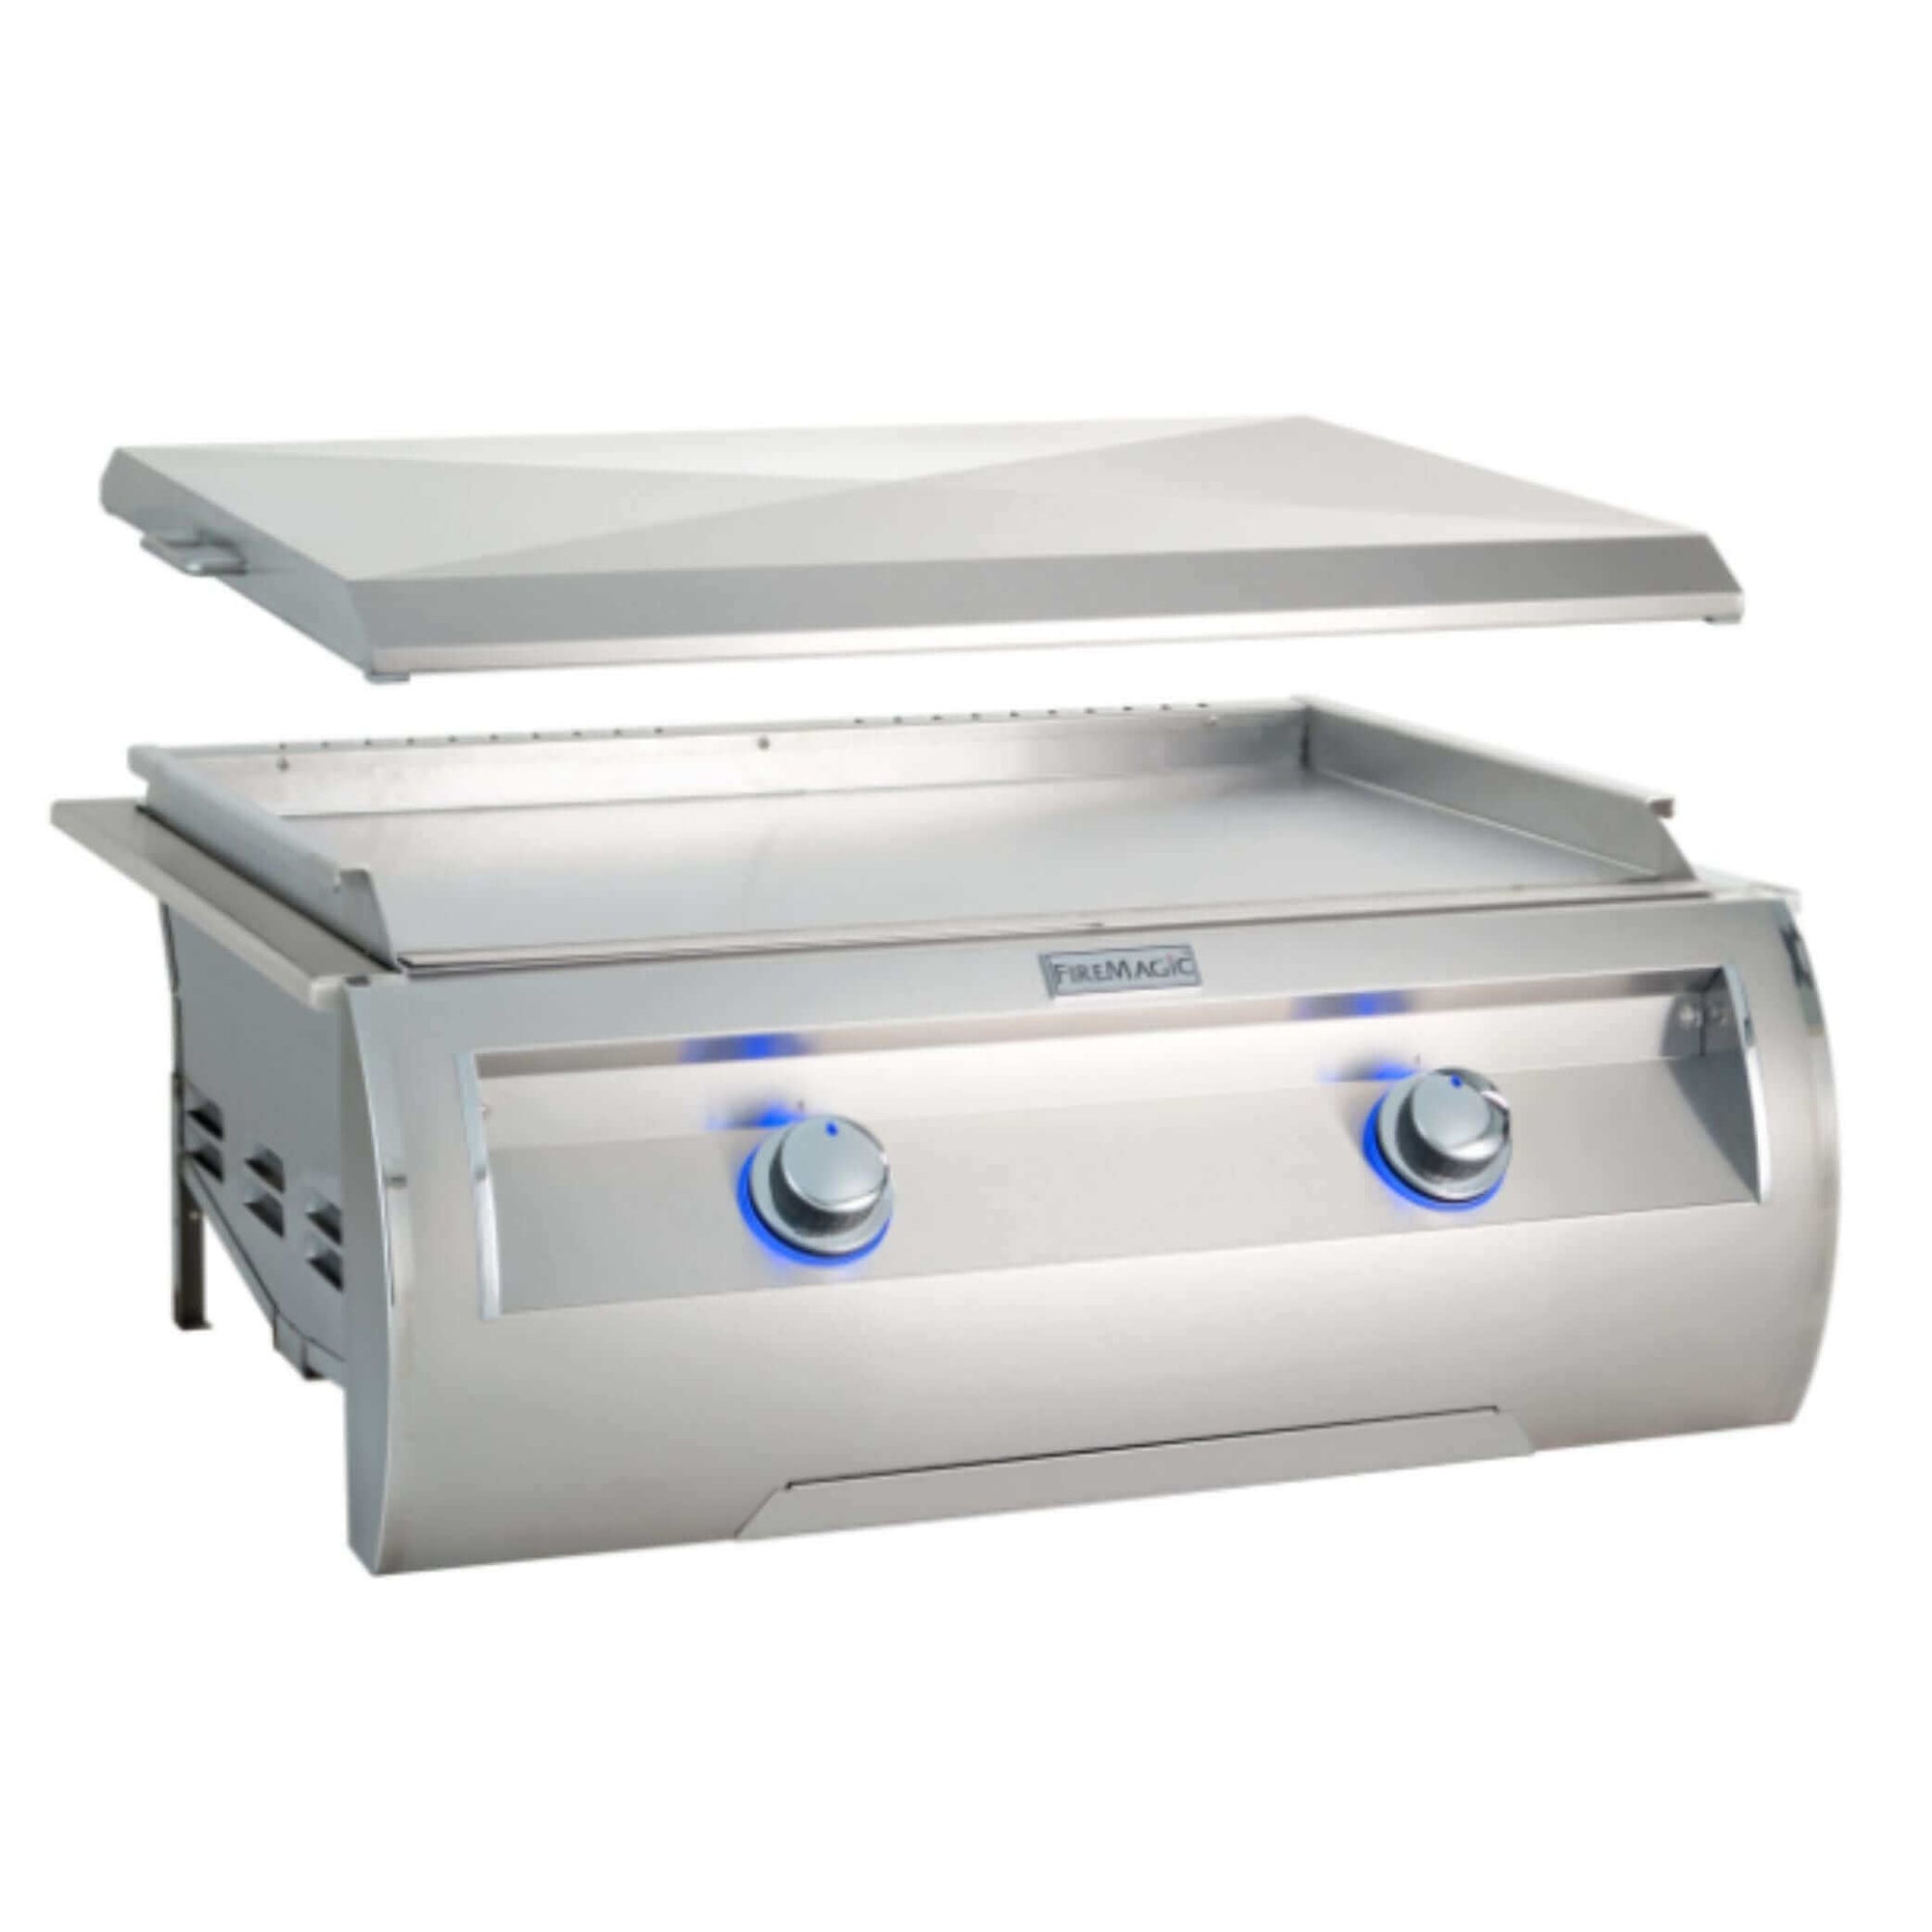 Fire Magic Echelon Diamond E660I 30" Built-In Griddle With Stainless Steel Cover-Natural Gas